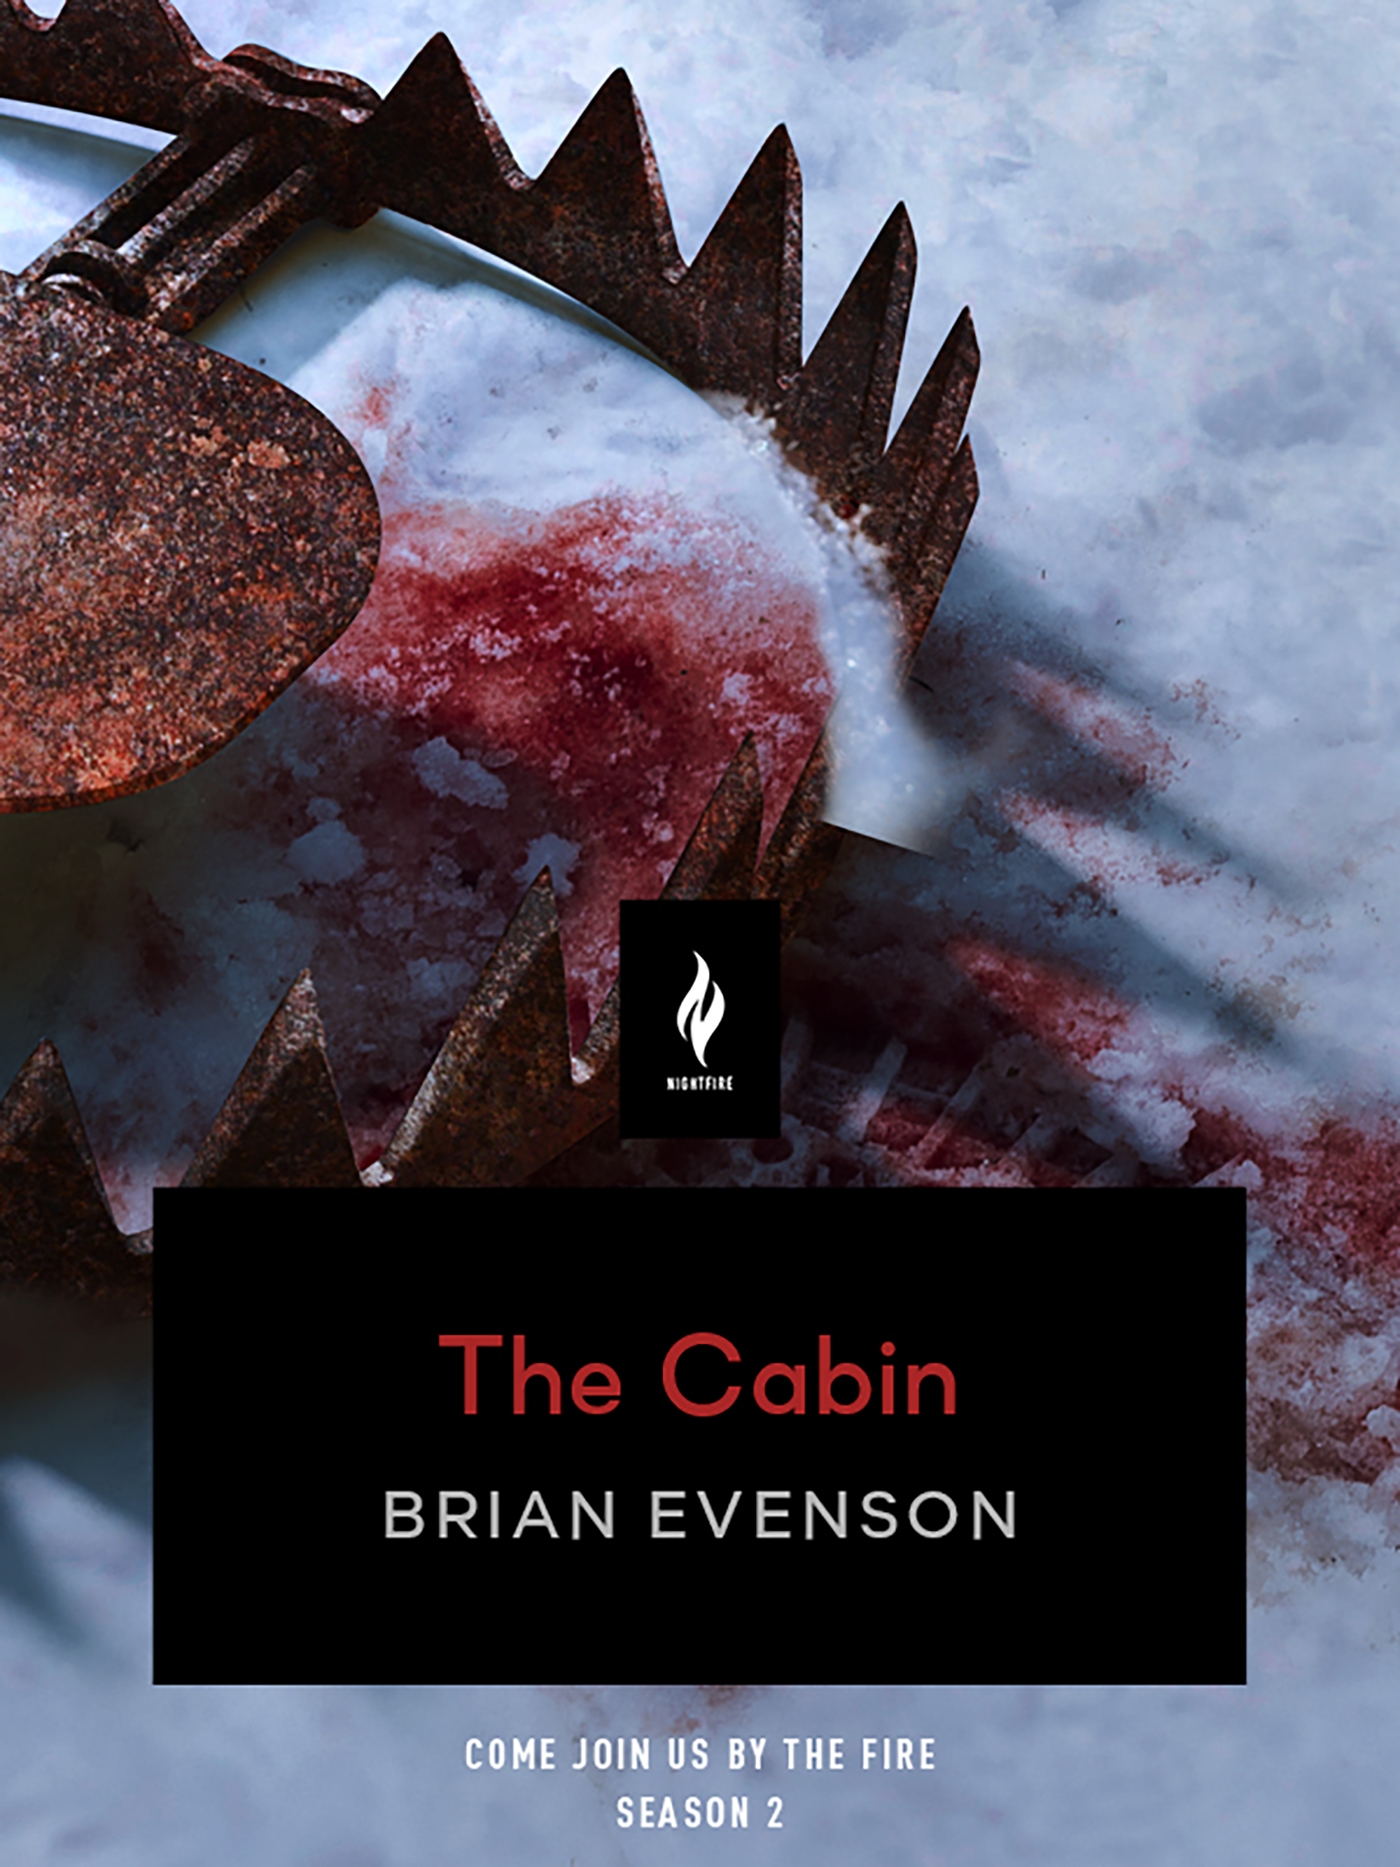 The Cabin : A Short Horror Story by Brian Evenson